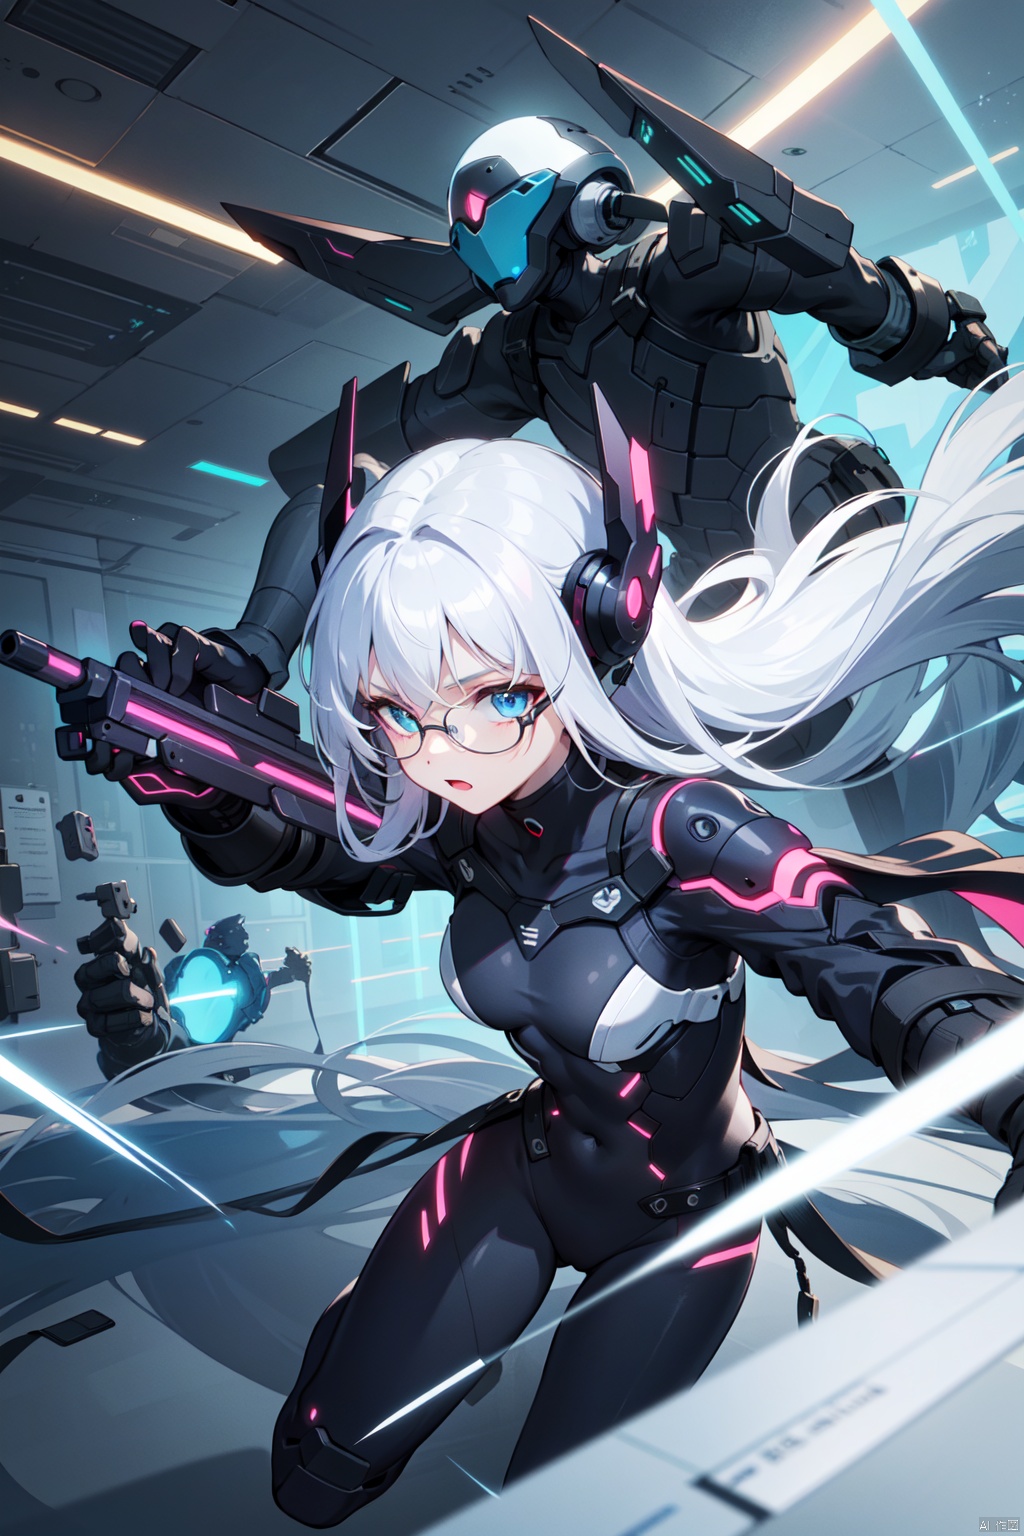  (((The cyber helmet covers the whole fac,a woman,White long hair,Blue eyes,beautiful girl,a weapon gun shaped like a graphics card,Wearing sci-fi style glasses